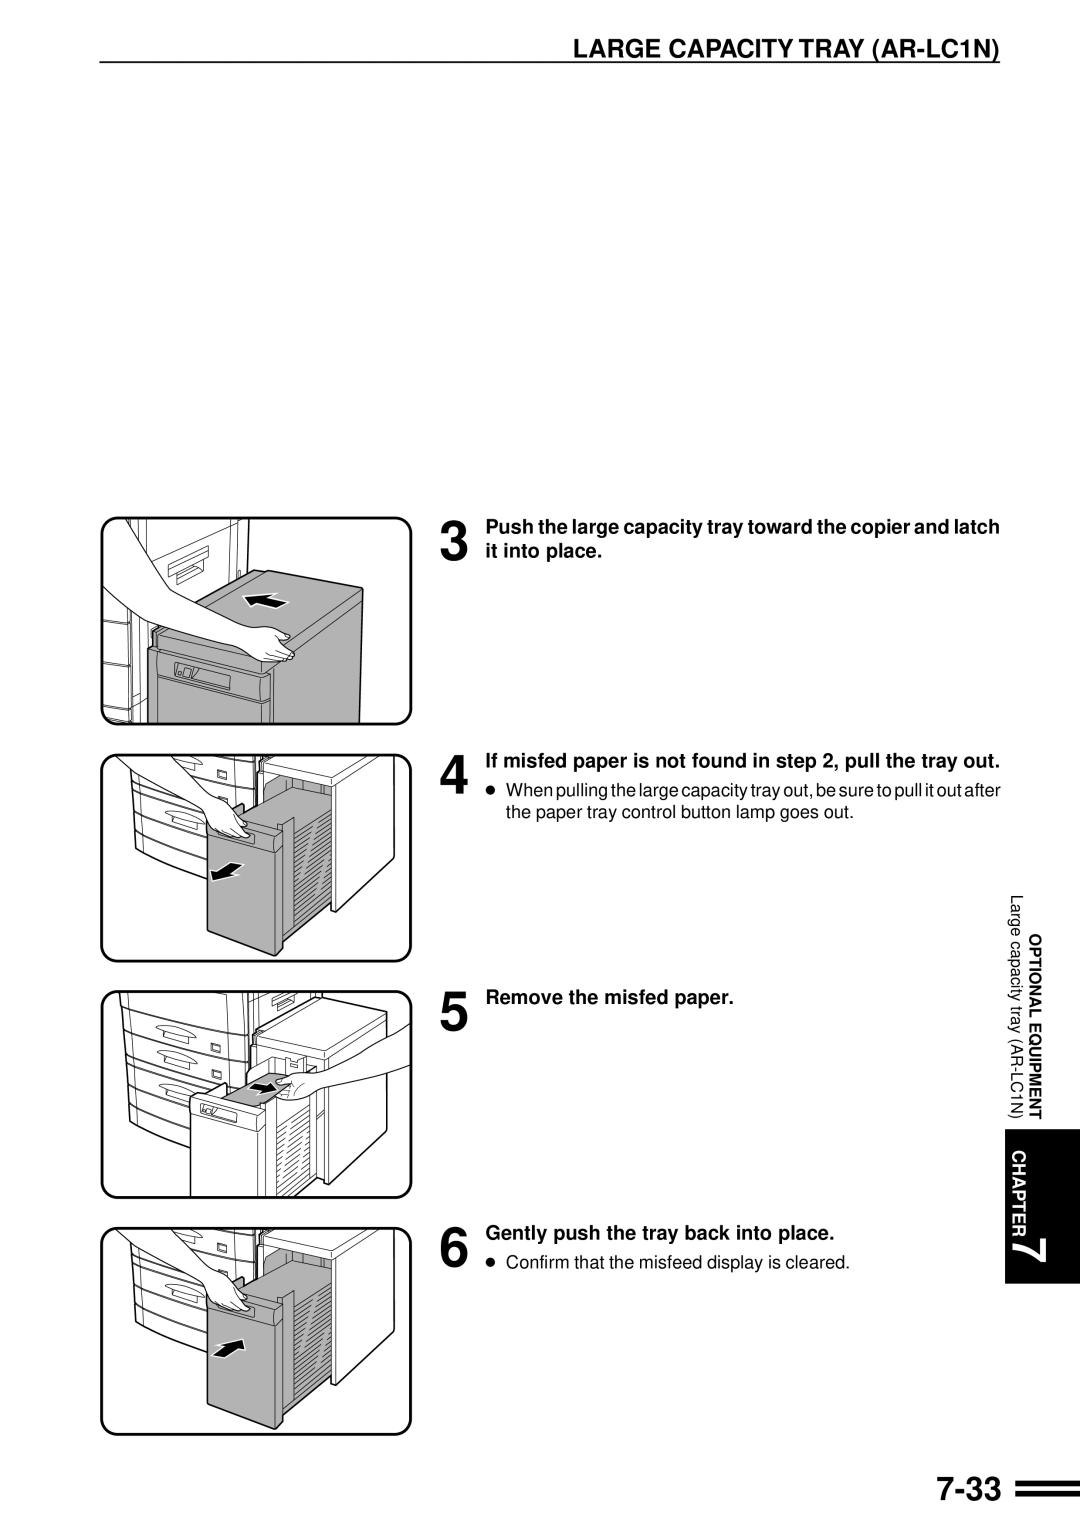 Sharp AR-287 manual 7-33, If misfed paper is not found in , pull the tray out, Remove the misfed paper, Optional Equipment 